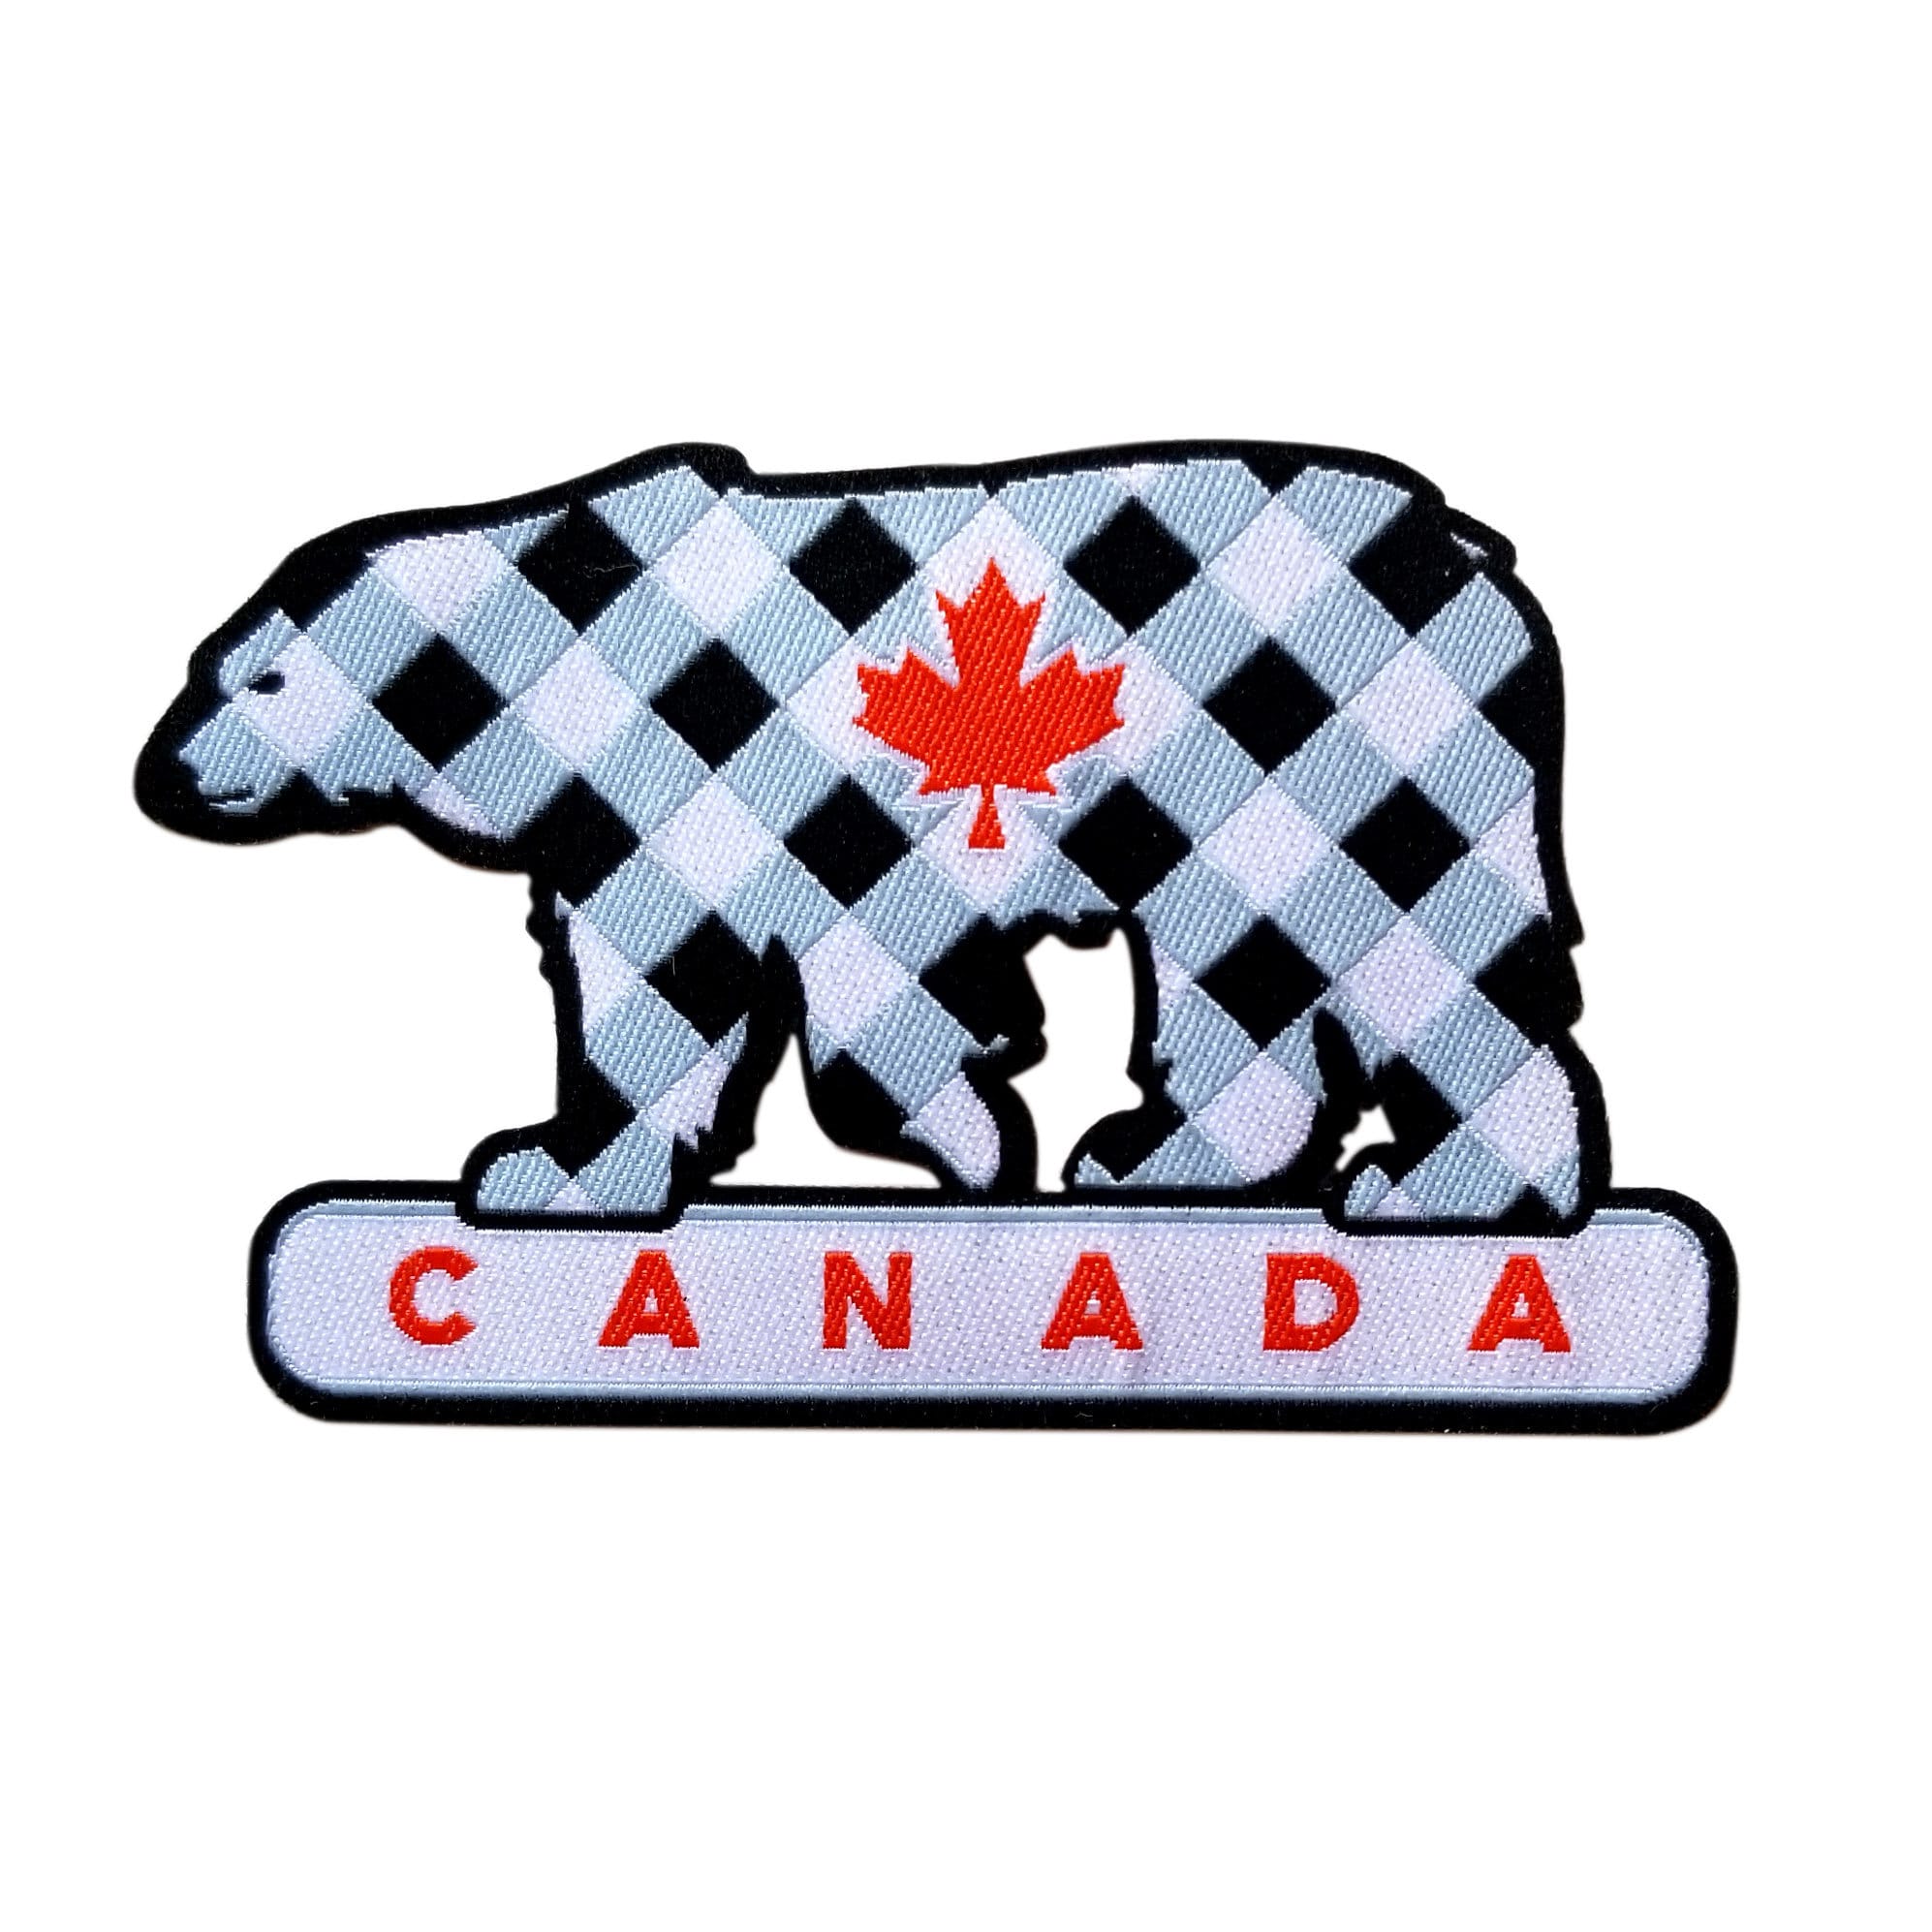 NEW CANADA POLAR BEAR WITH WORD IRON-ON PATCH CREST BADGE .